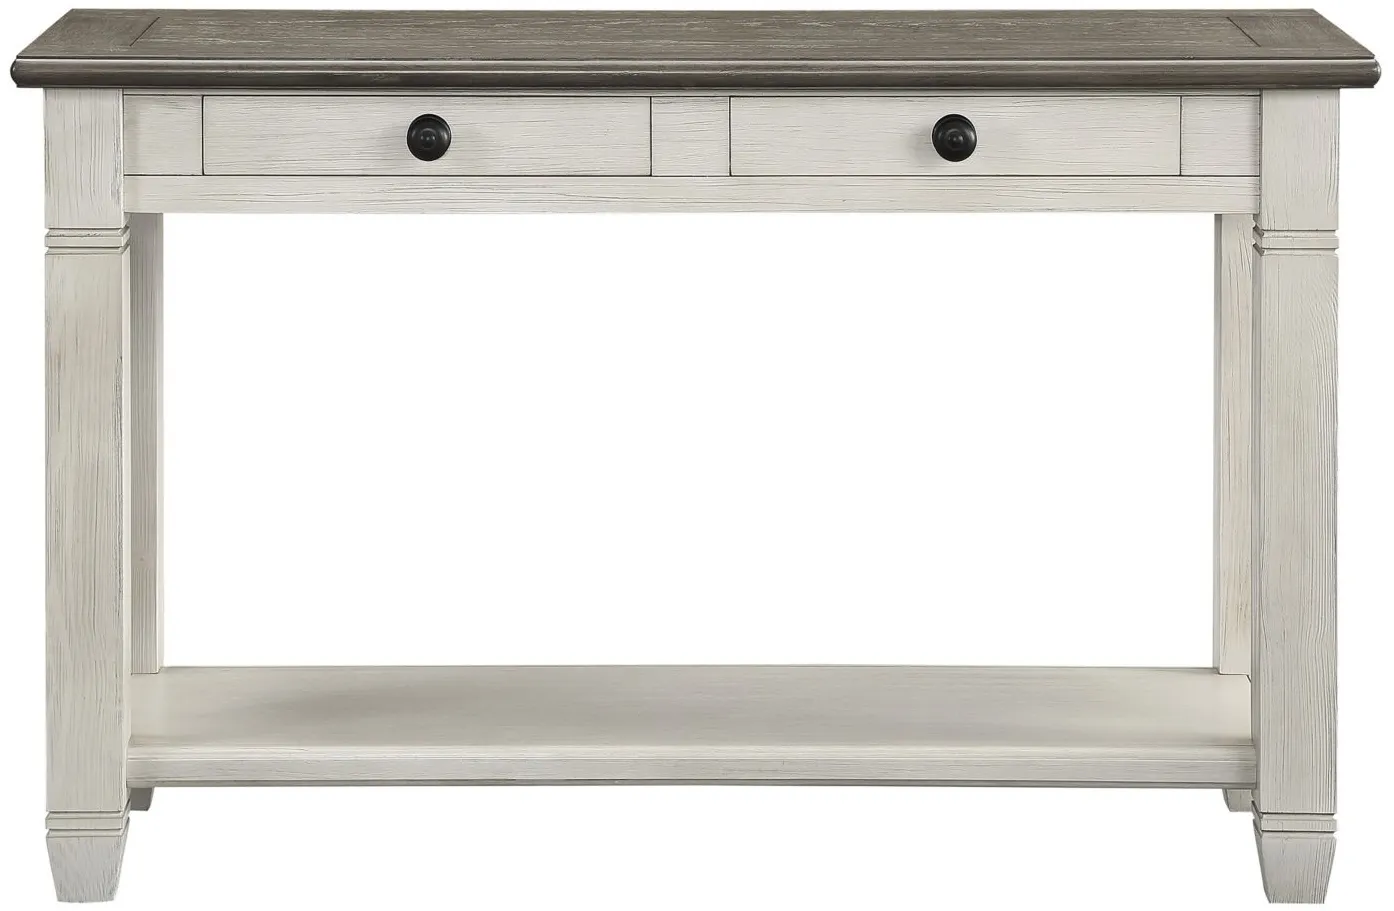 Lark Sofa Table in 2-Tone Finish (Antique White and Rosy Brown) by Homelegance